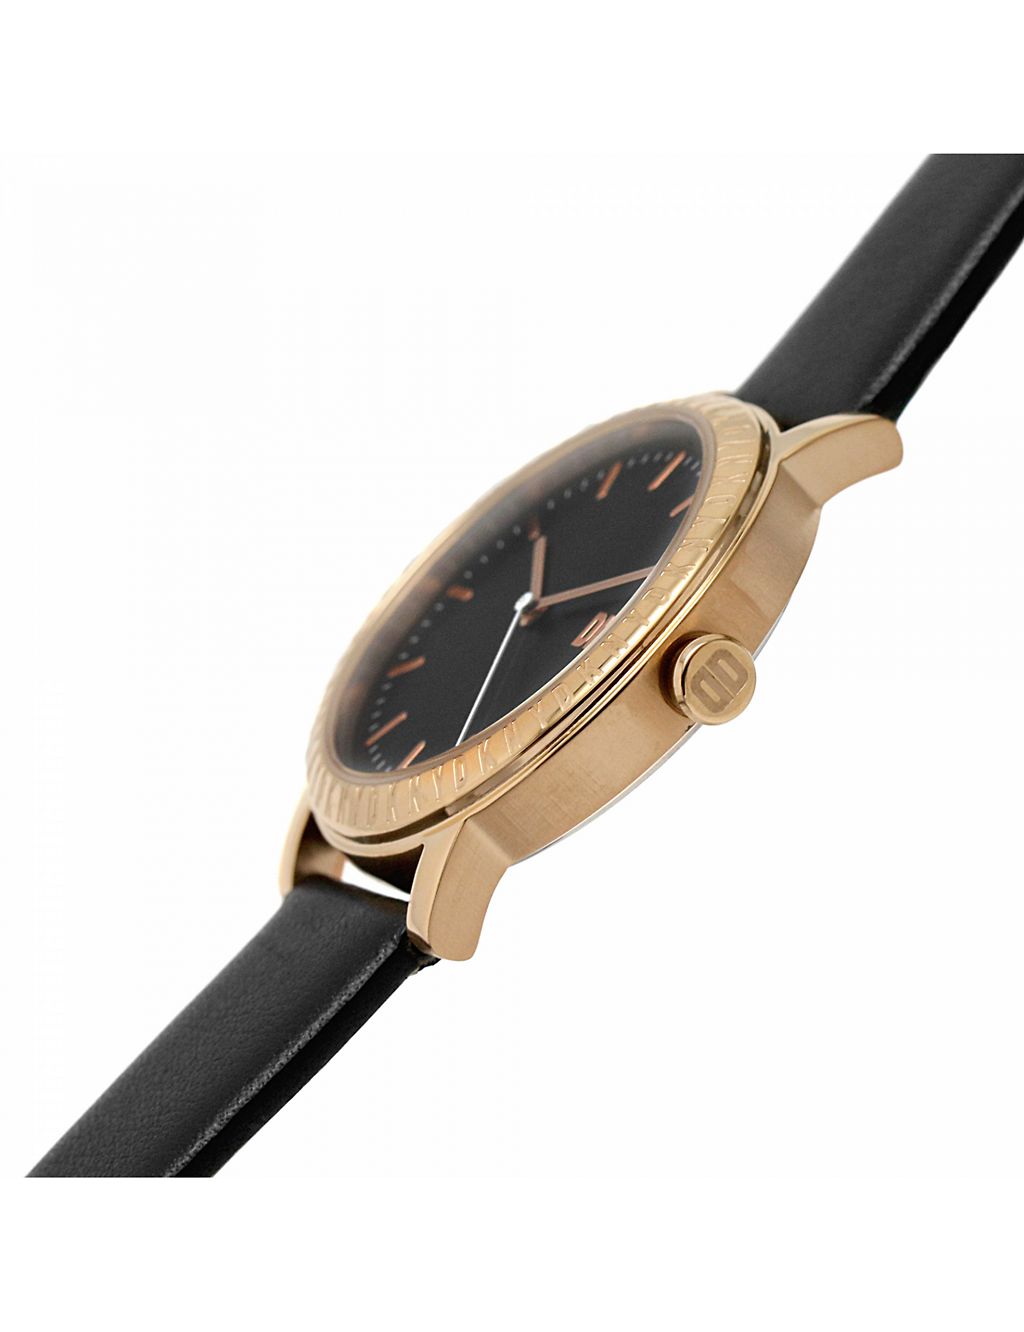 DKNY 7th Avenue Black Leather Watch 4 of 10